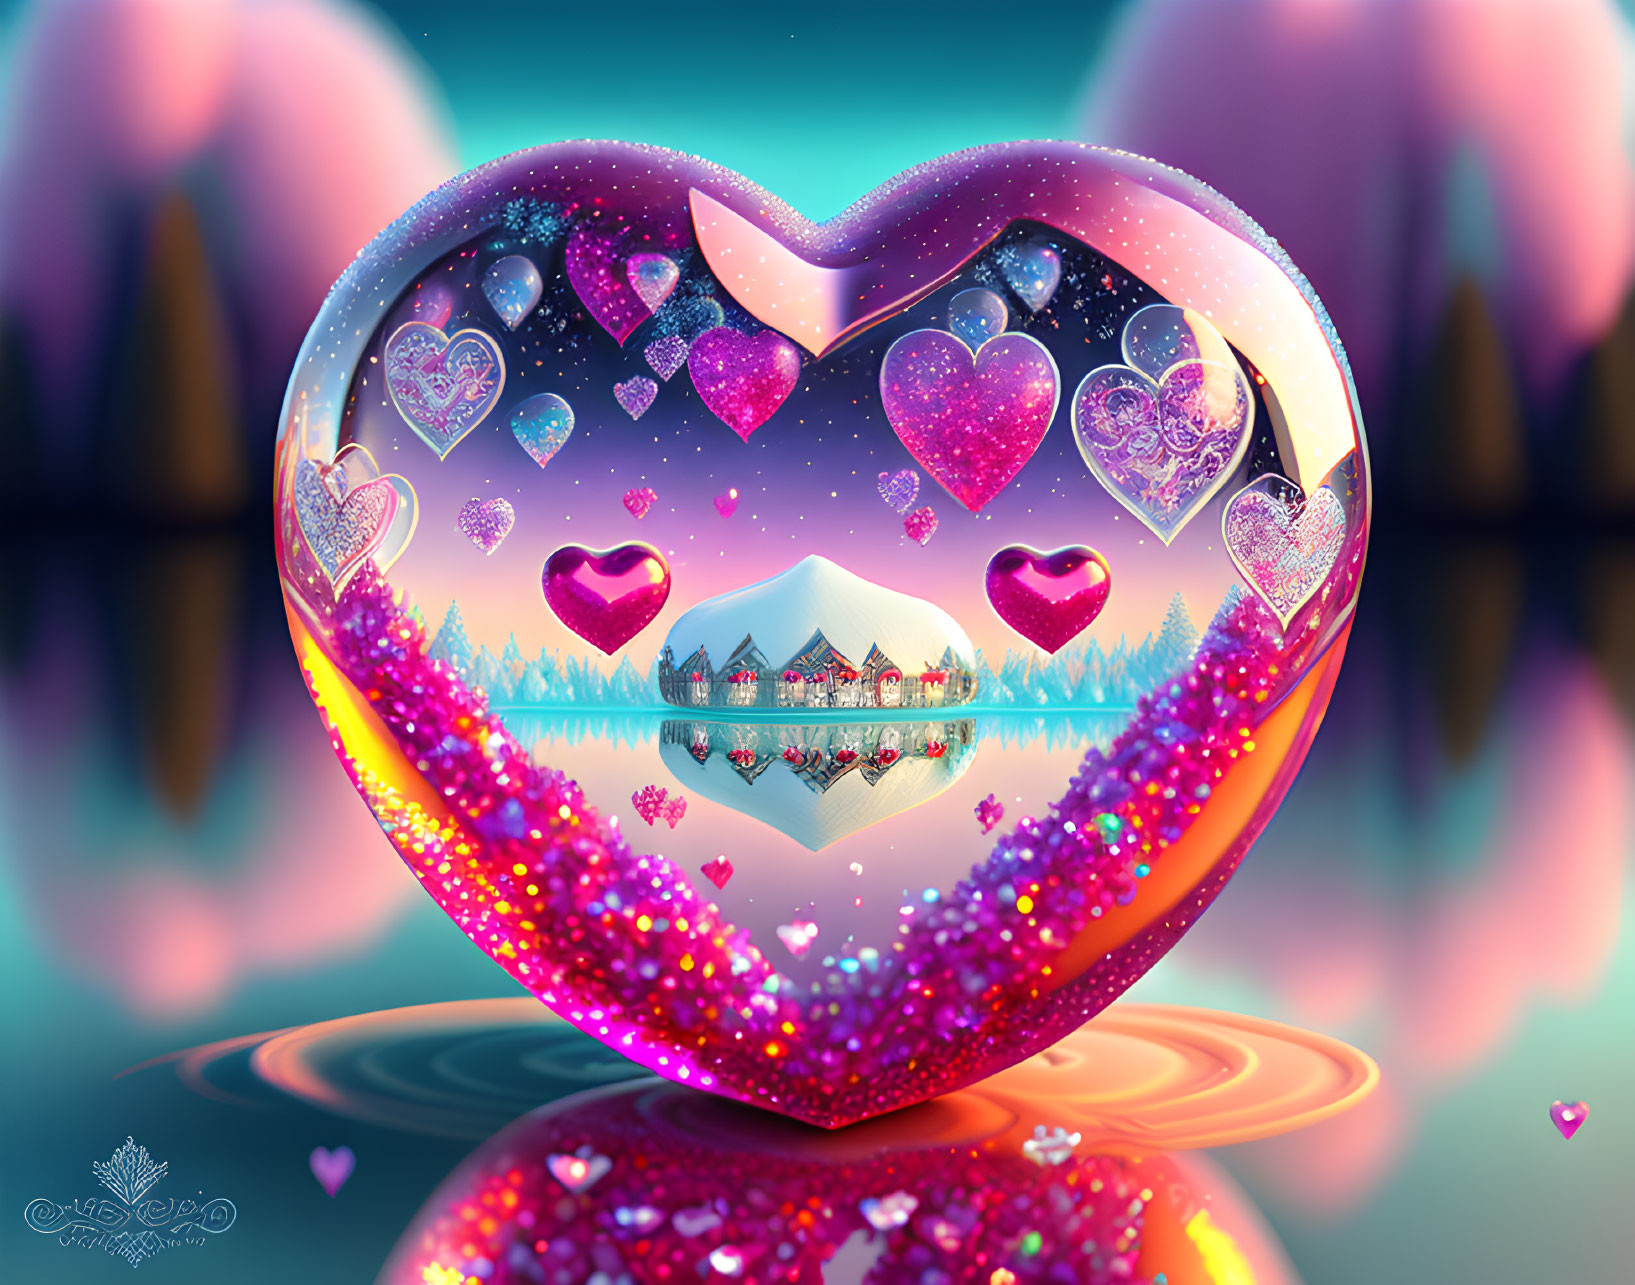 Heart-shaped frame with fantasy landscape and glittering hearts